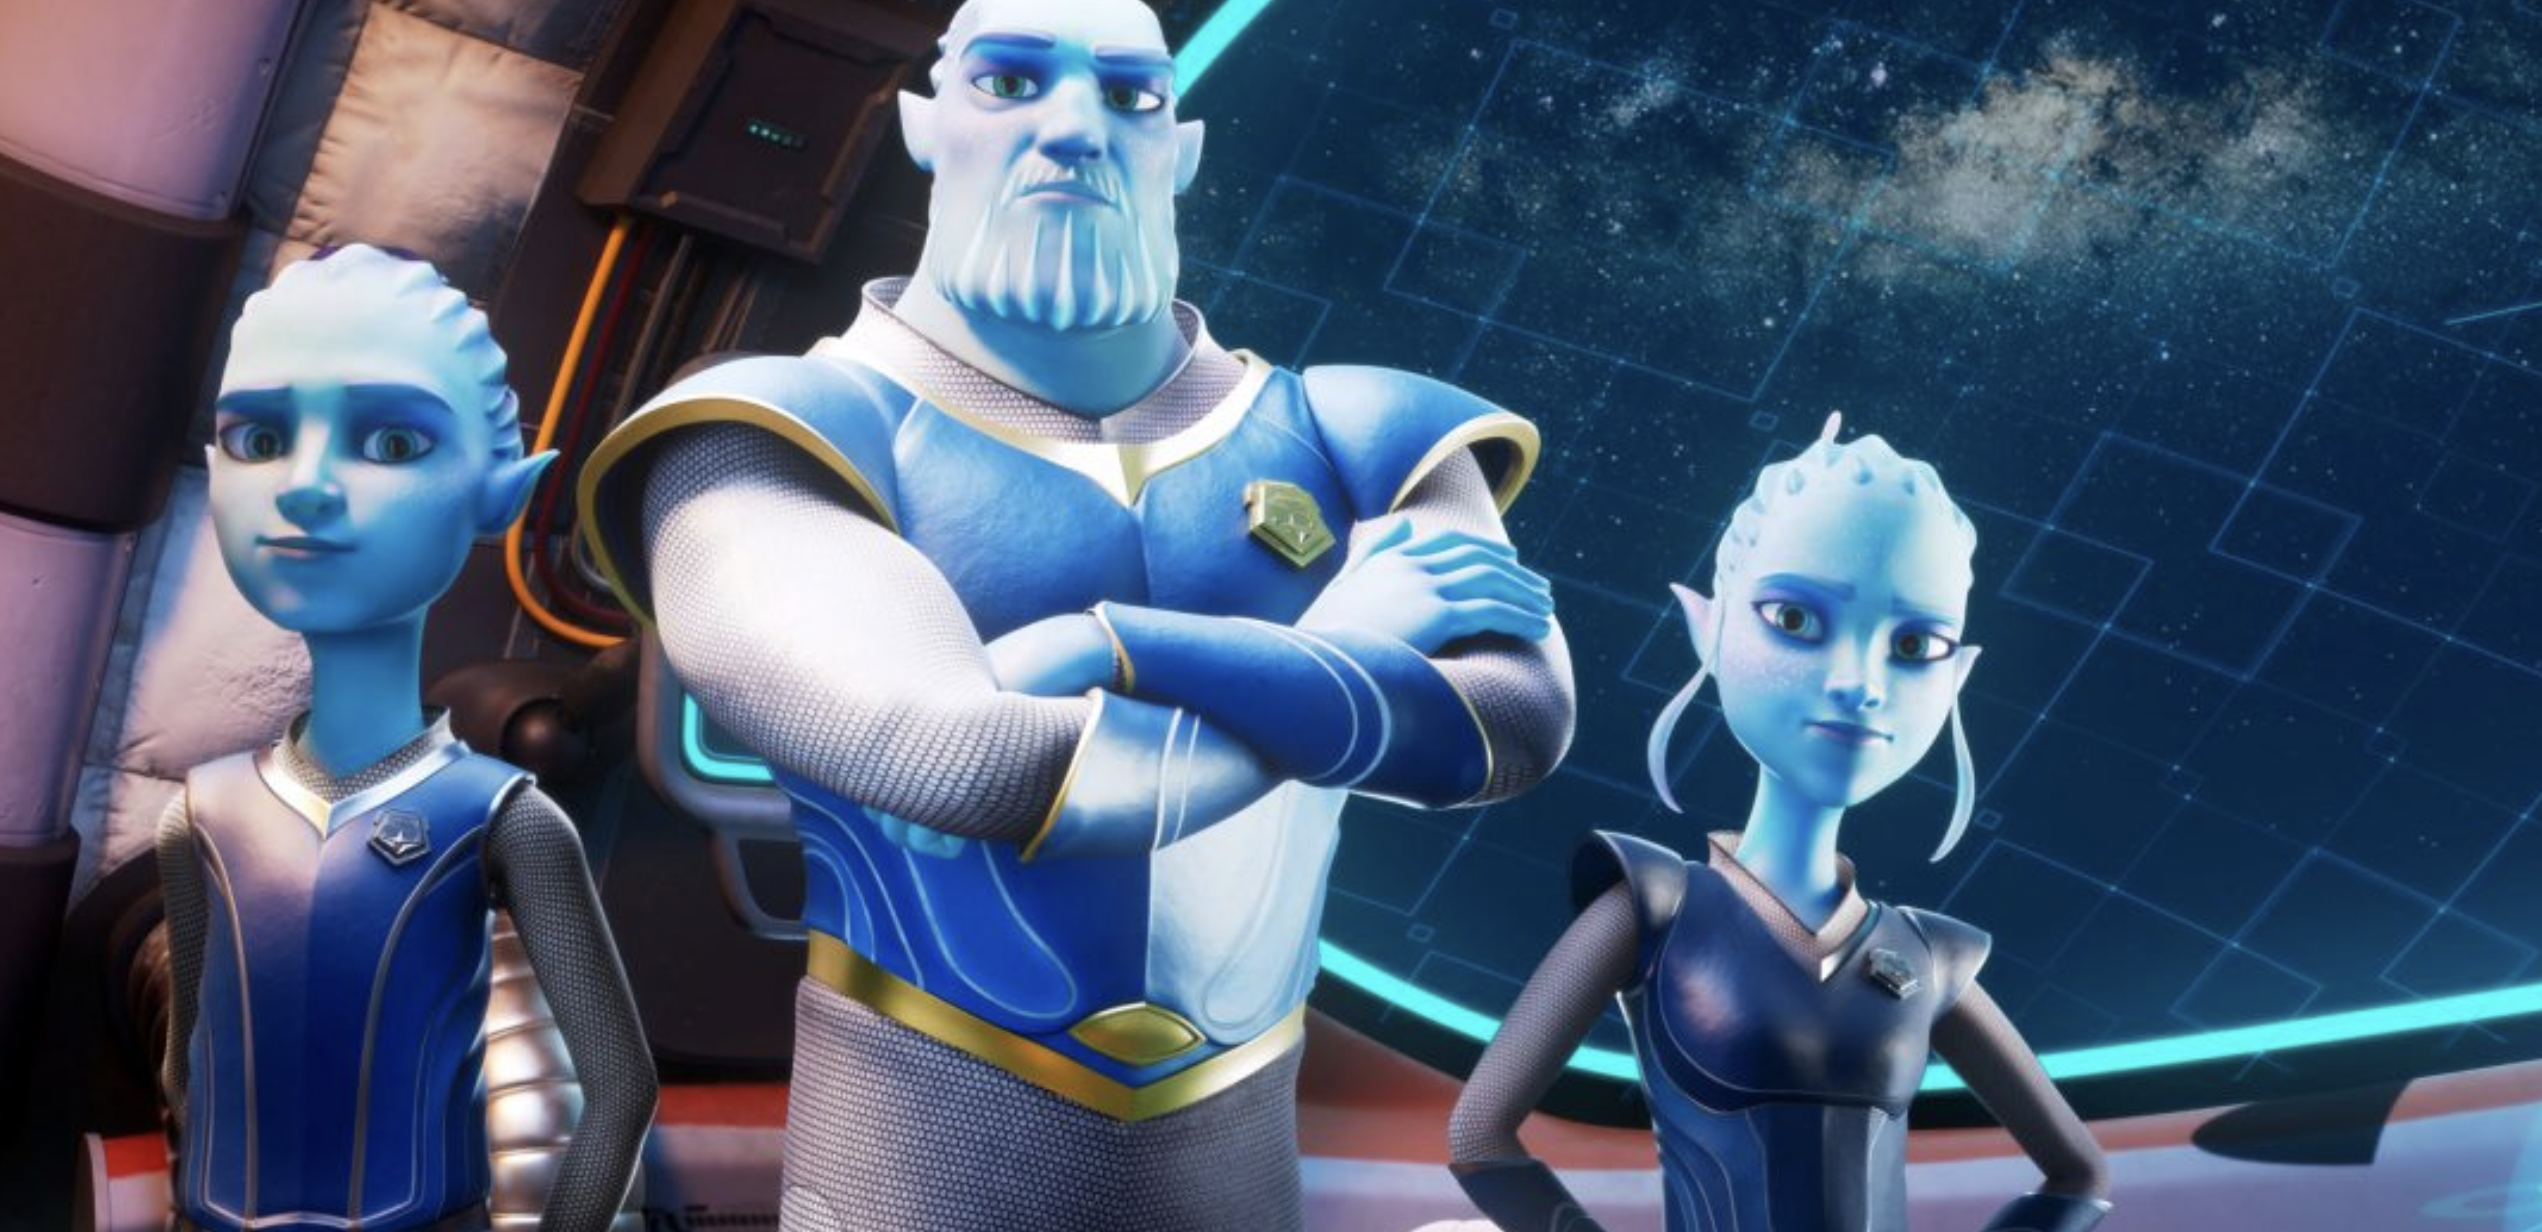 A group of blue aliens look sternly and proudly in their space uniforms